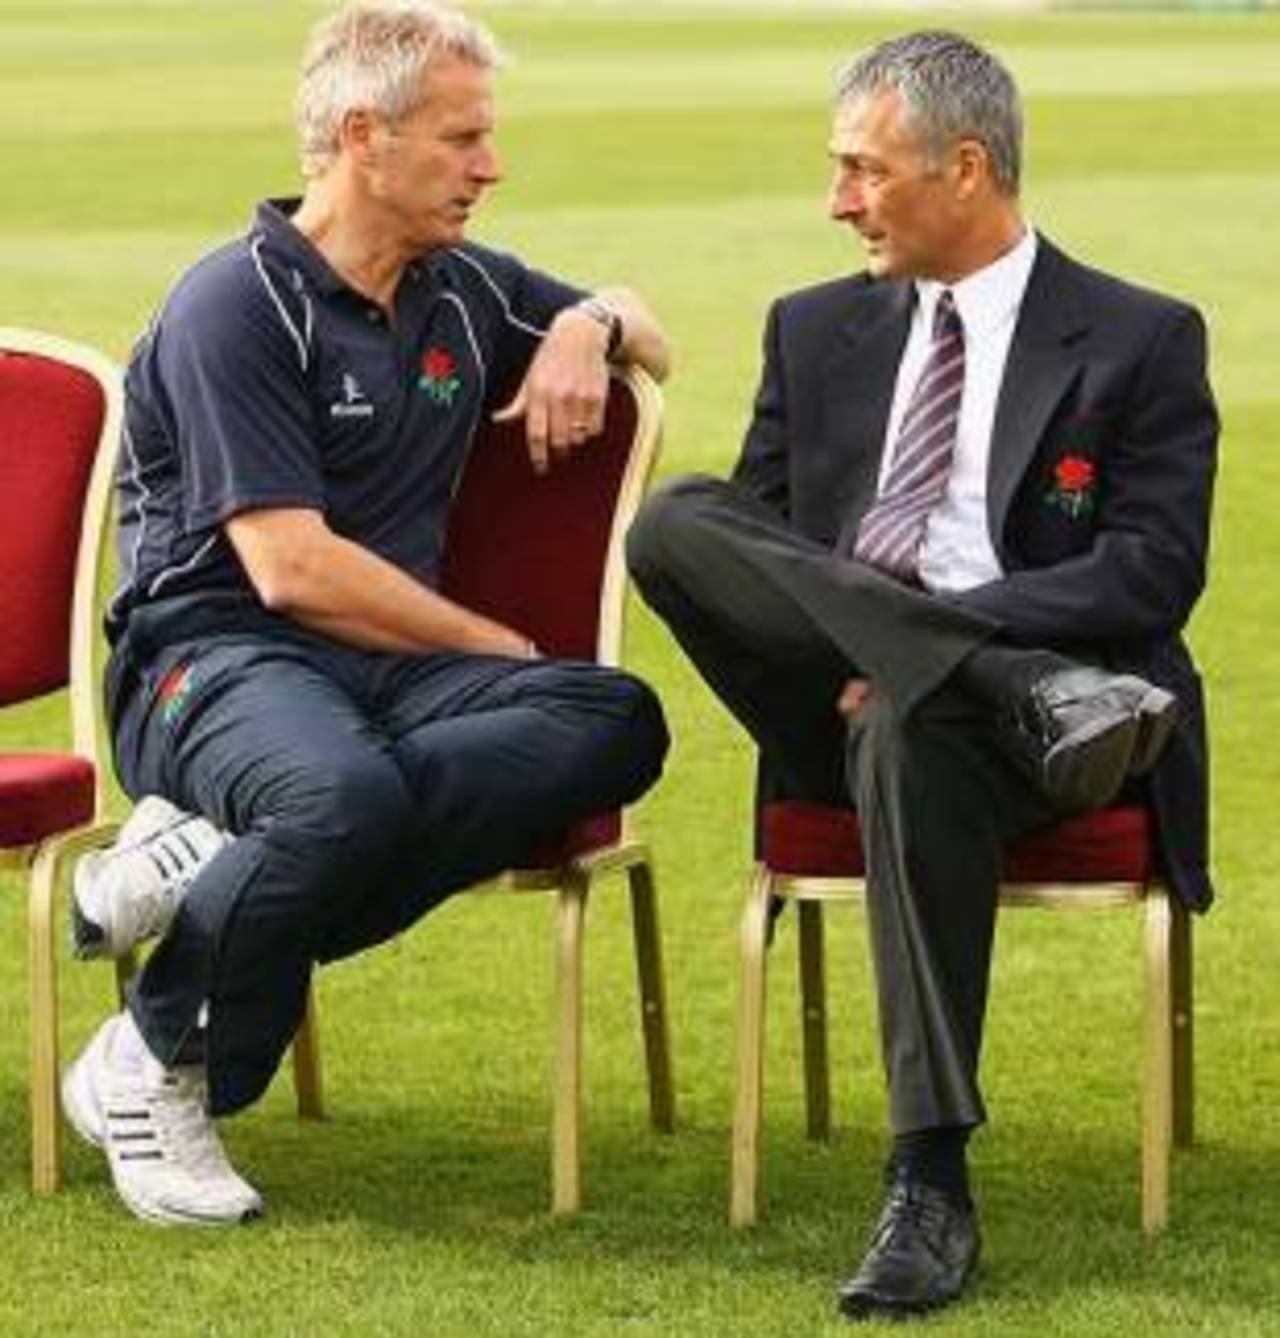 Peter Moores and Mike Watkinson in discussion at Old Trafford, Manchester, April 6, 2009